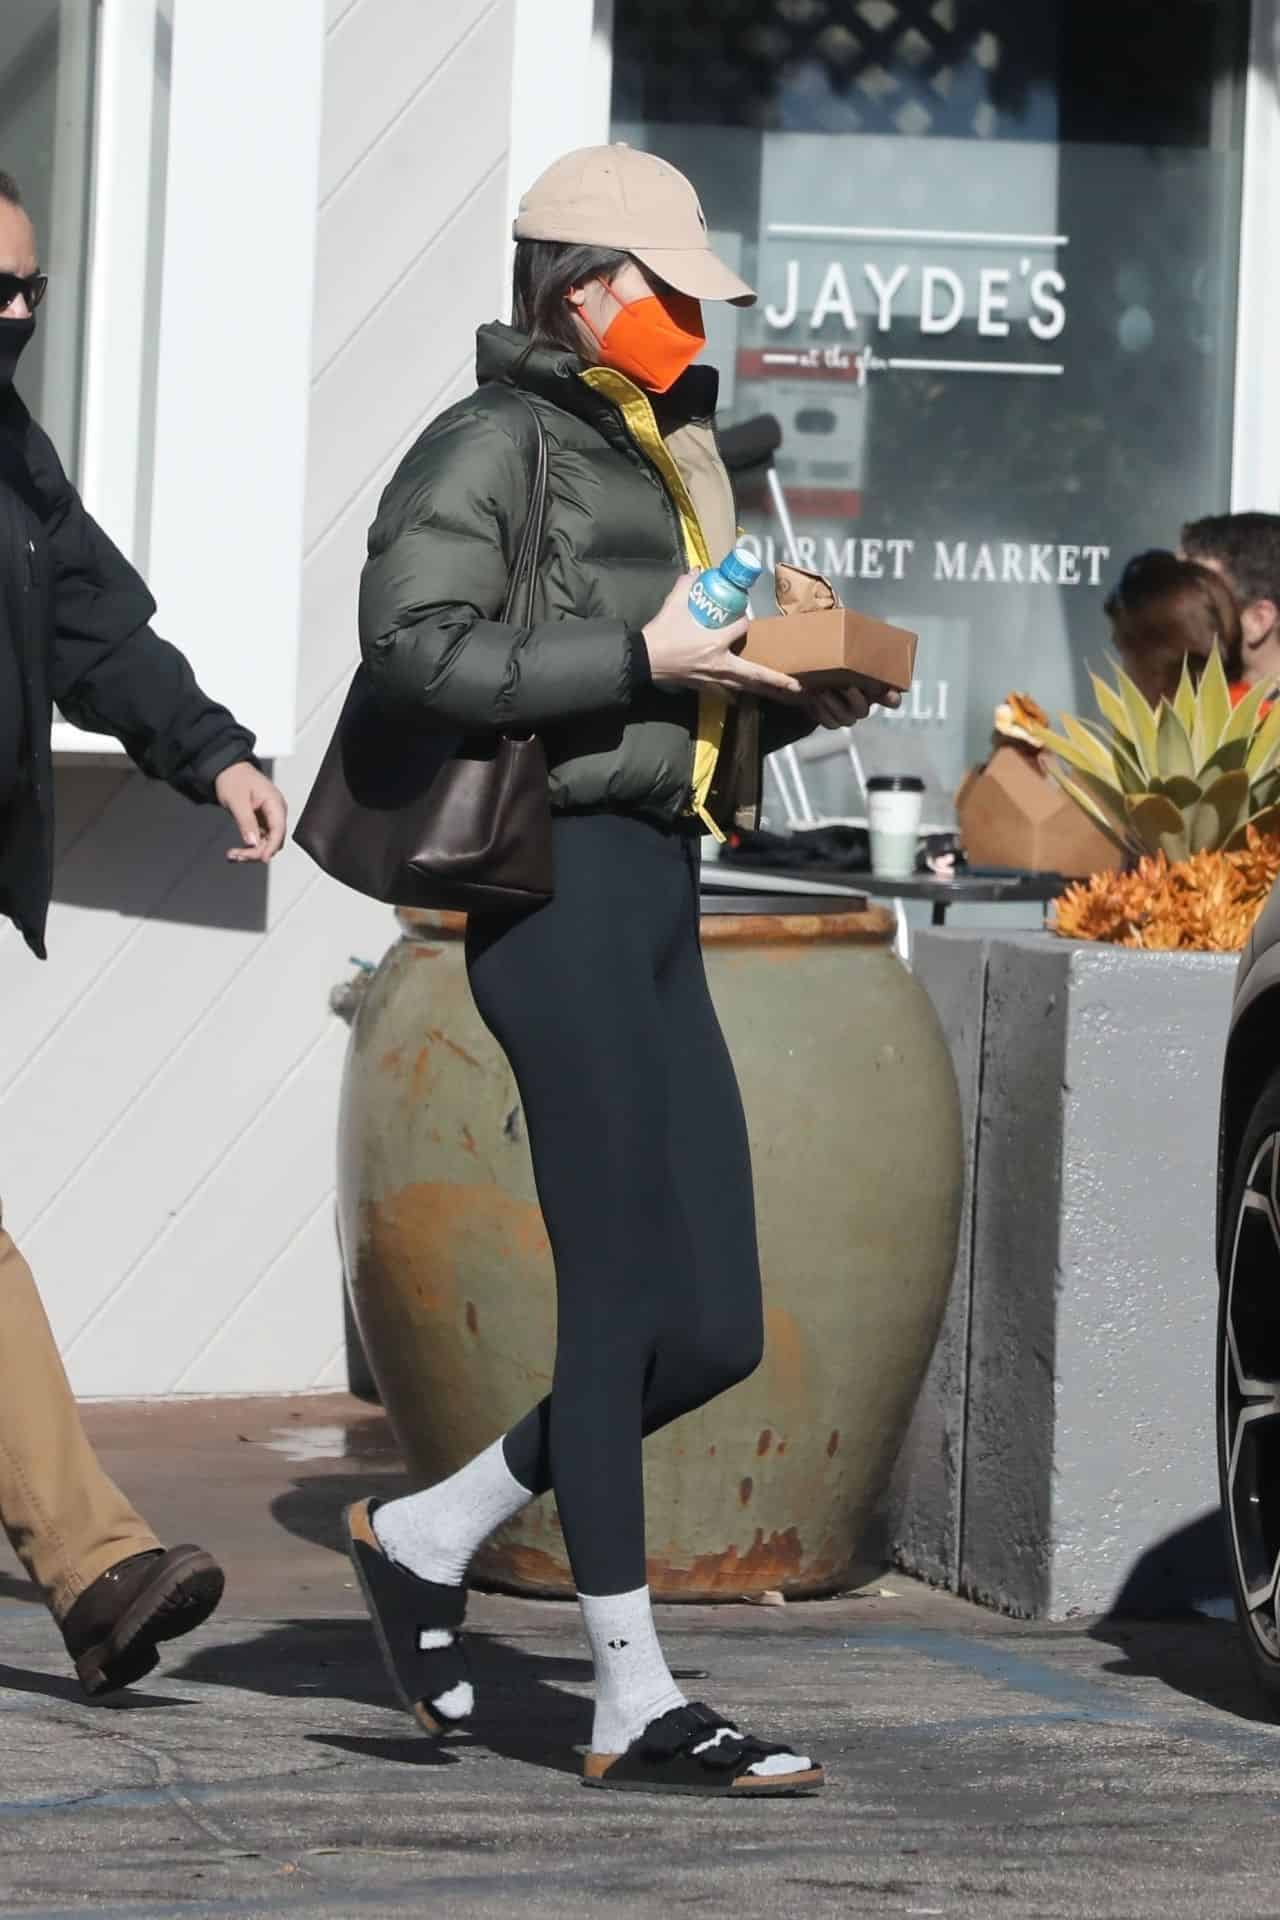 Kendall Jenner Sported a Casual Look as She Grabbed Lunch at Jayde’s Market